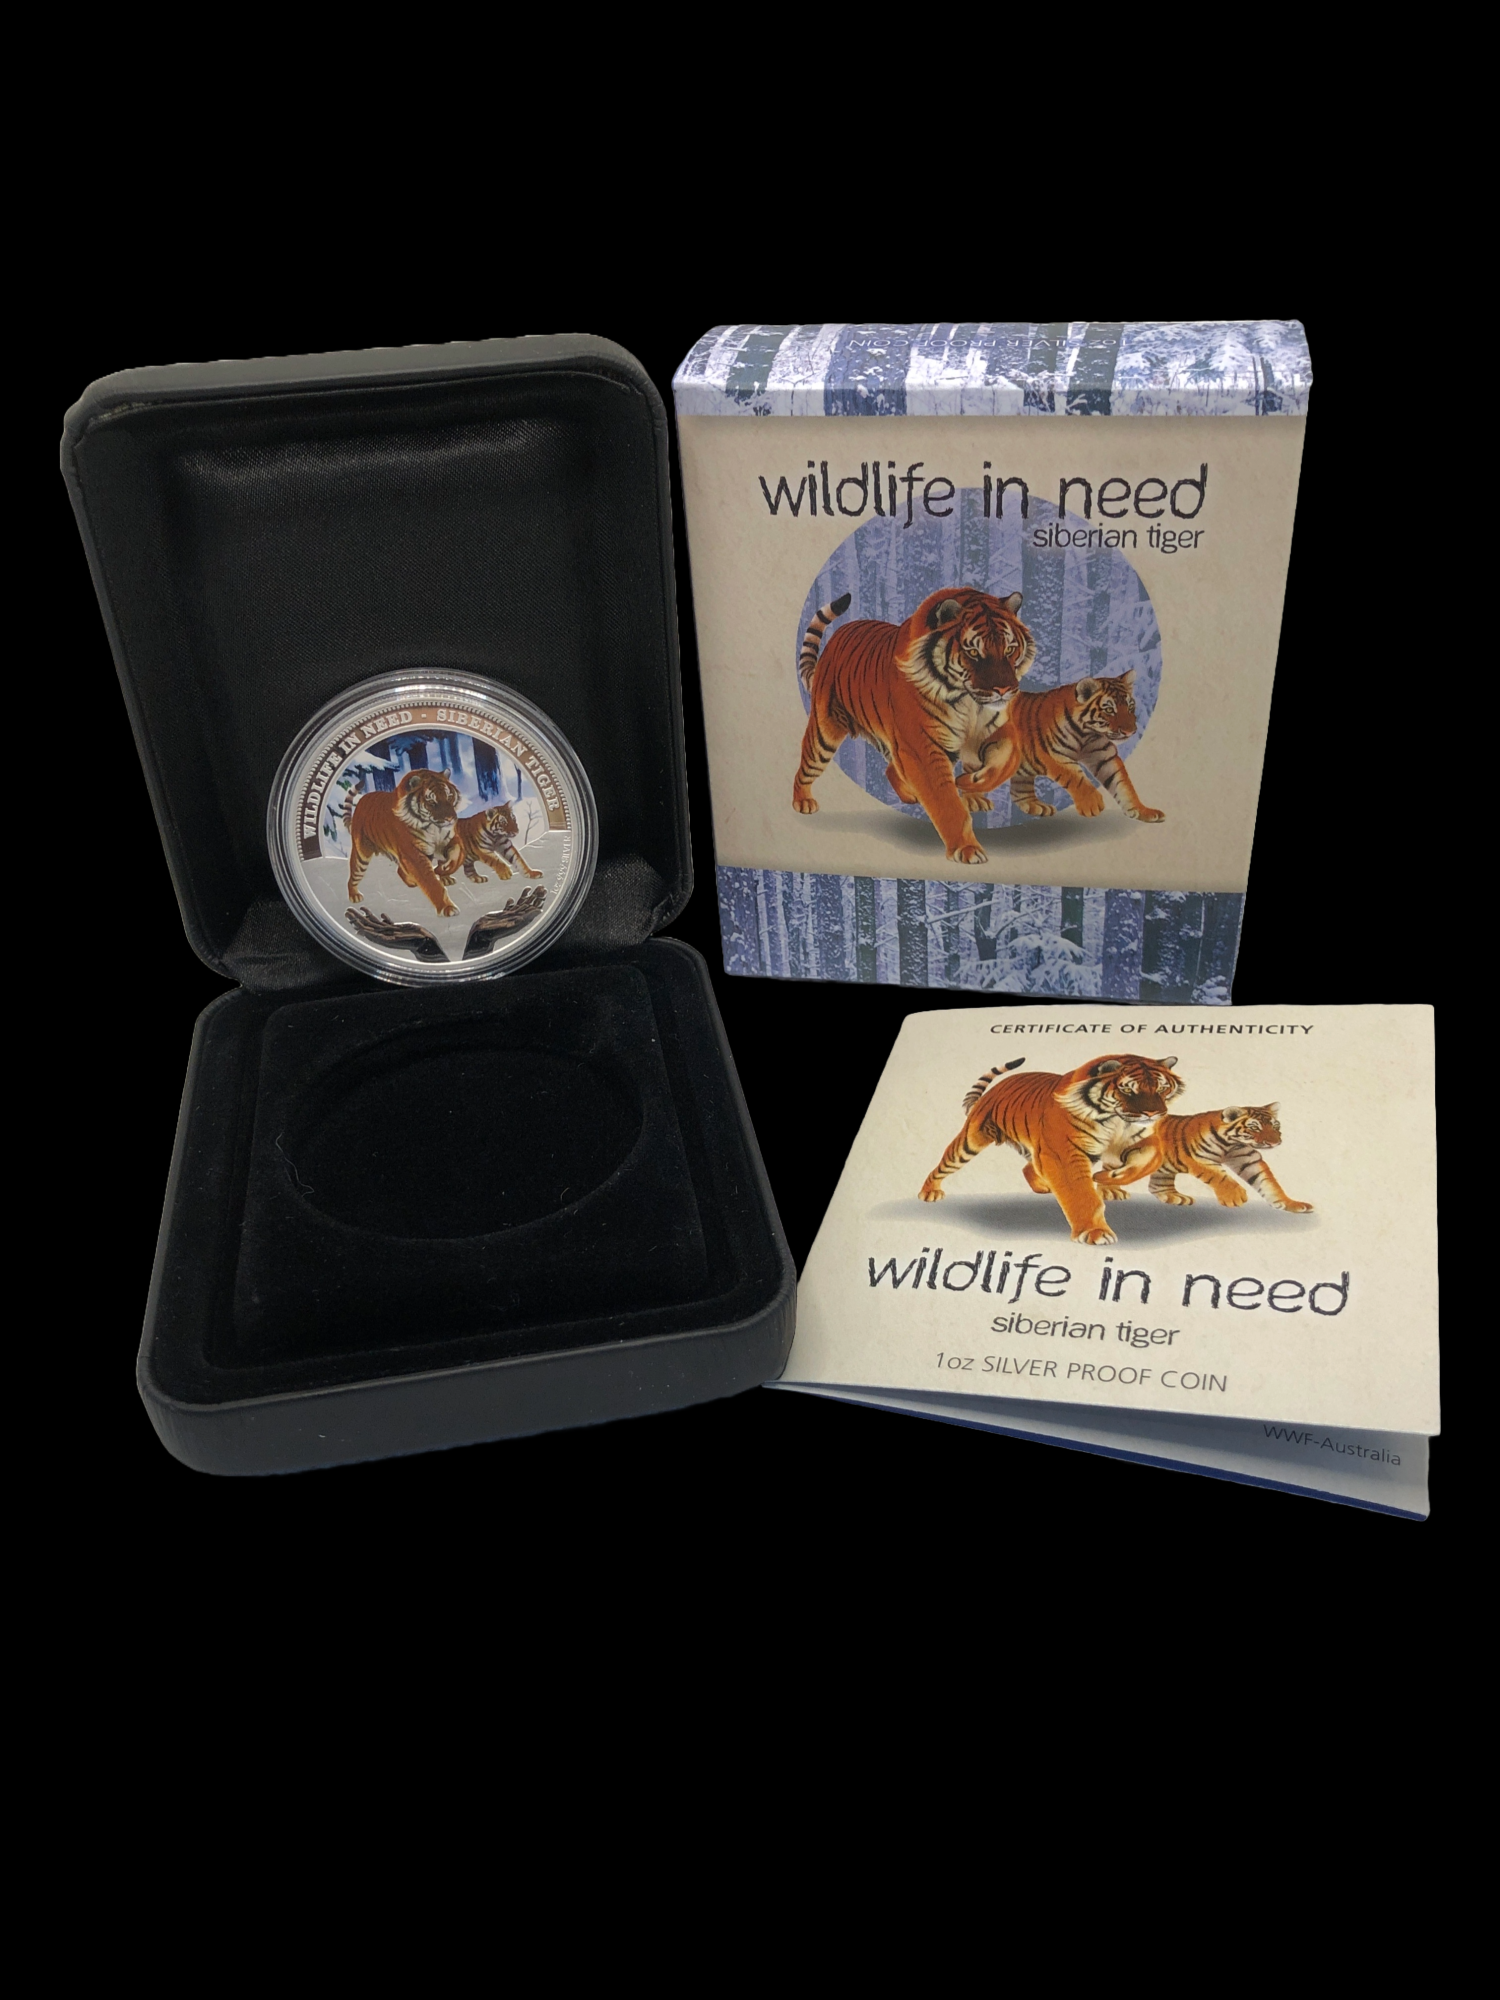 Thumbnail for 2012 Tuvalu Wildlife In Need 1oz Coloured Silver Coin - Siberian Tiger